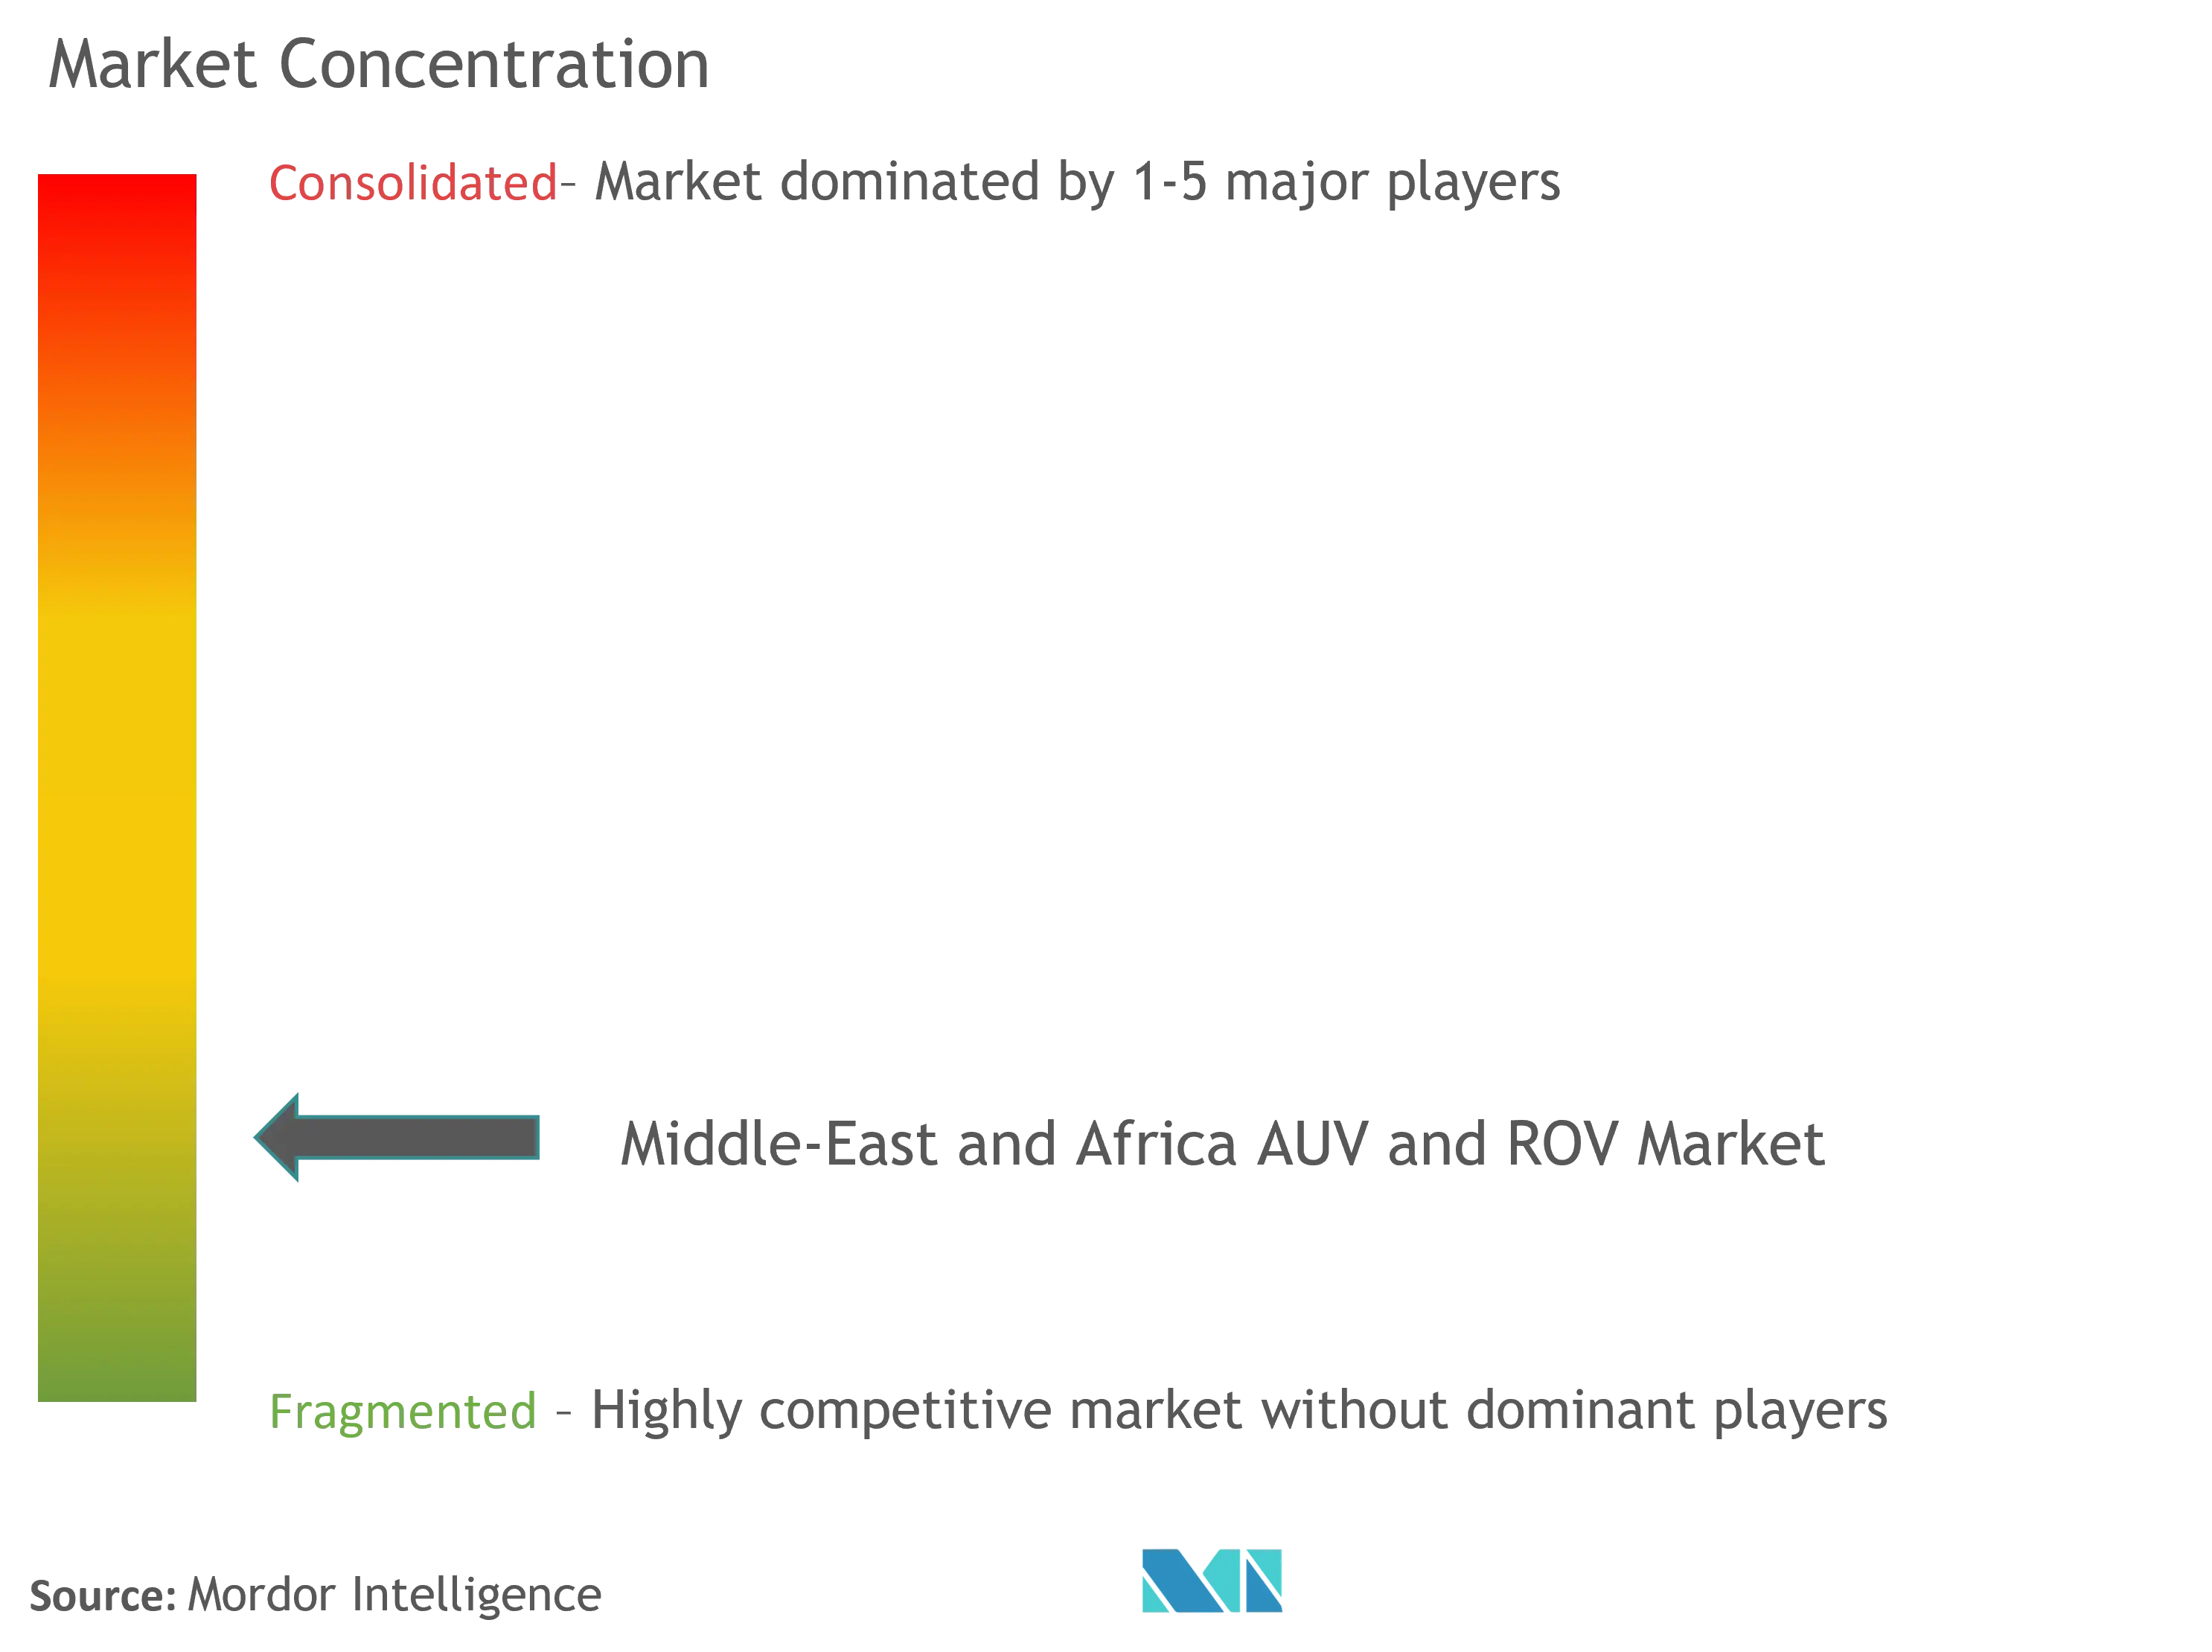 Middle-East and Africa AUV & ROV Market Concentration